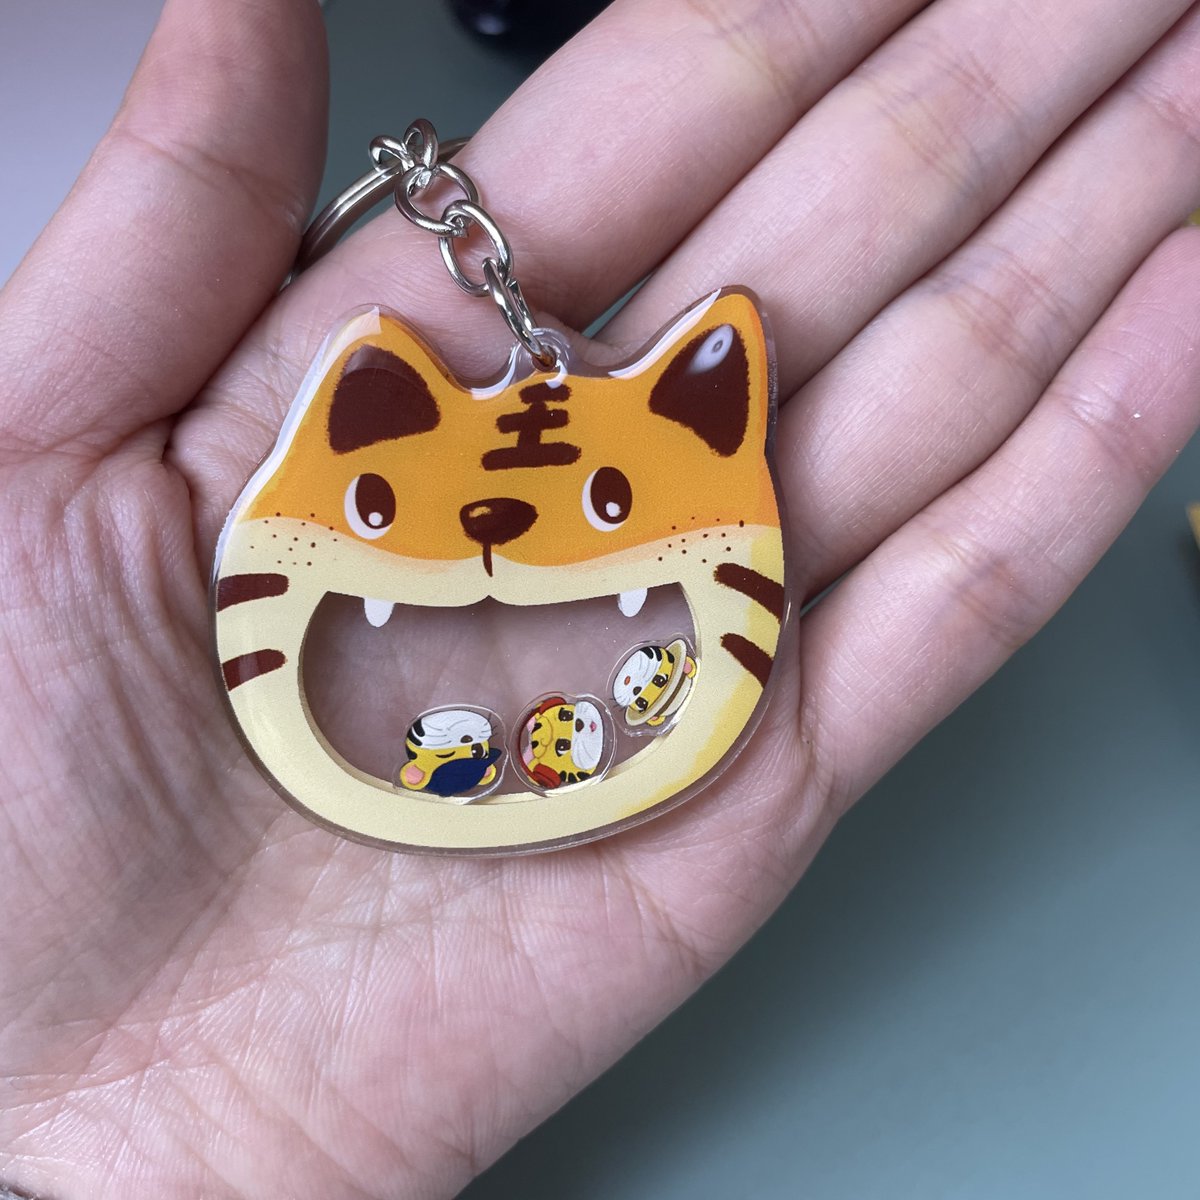 “A” & “a”!! I love the little one more🥰🥰🥰
It's tiny and easy to carry~~
What do you think?🐱

#shaker #shakerkeychain #shakercharm #shakercharms #acrylickeychain #acryliccharms #cutekeychain #cutecharms #customproducts #customanime